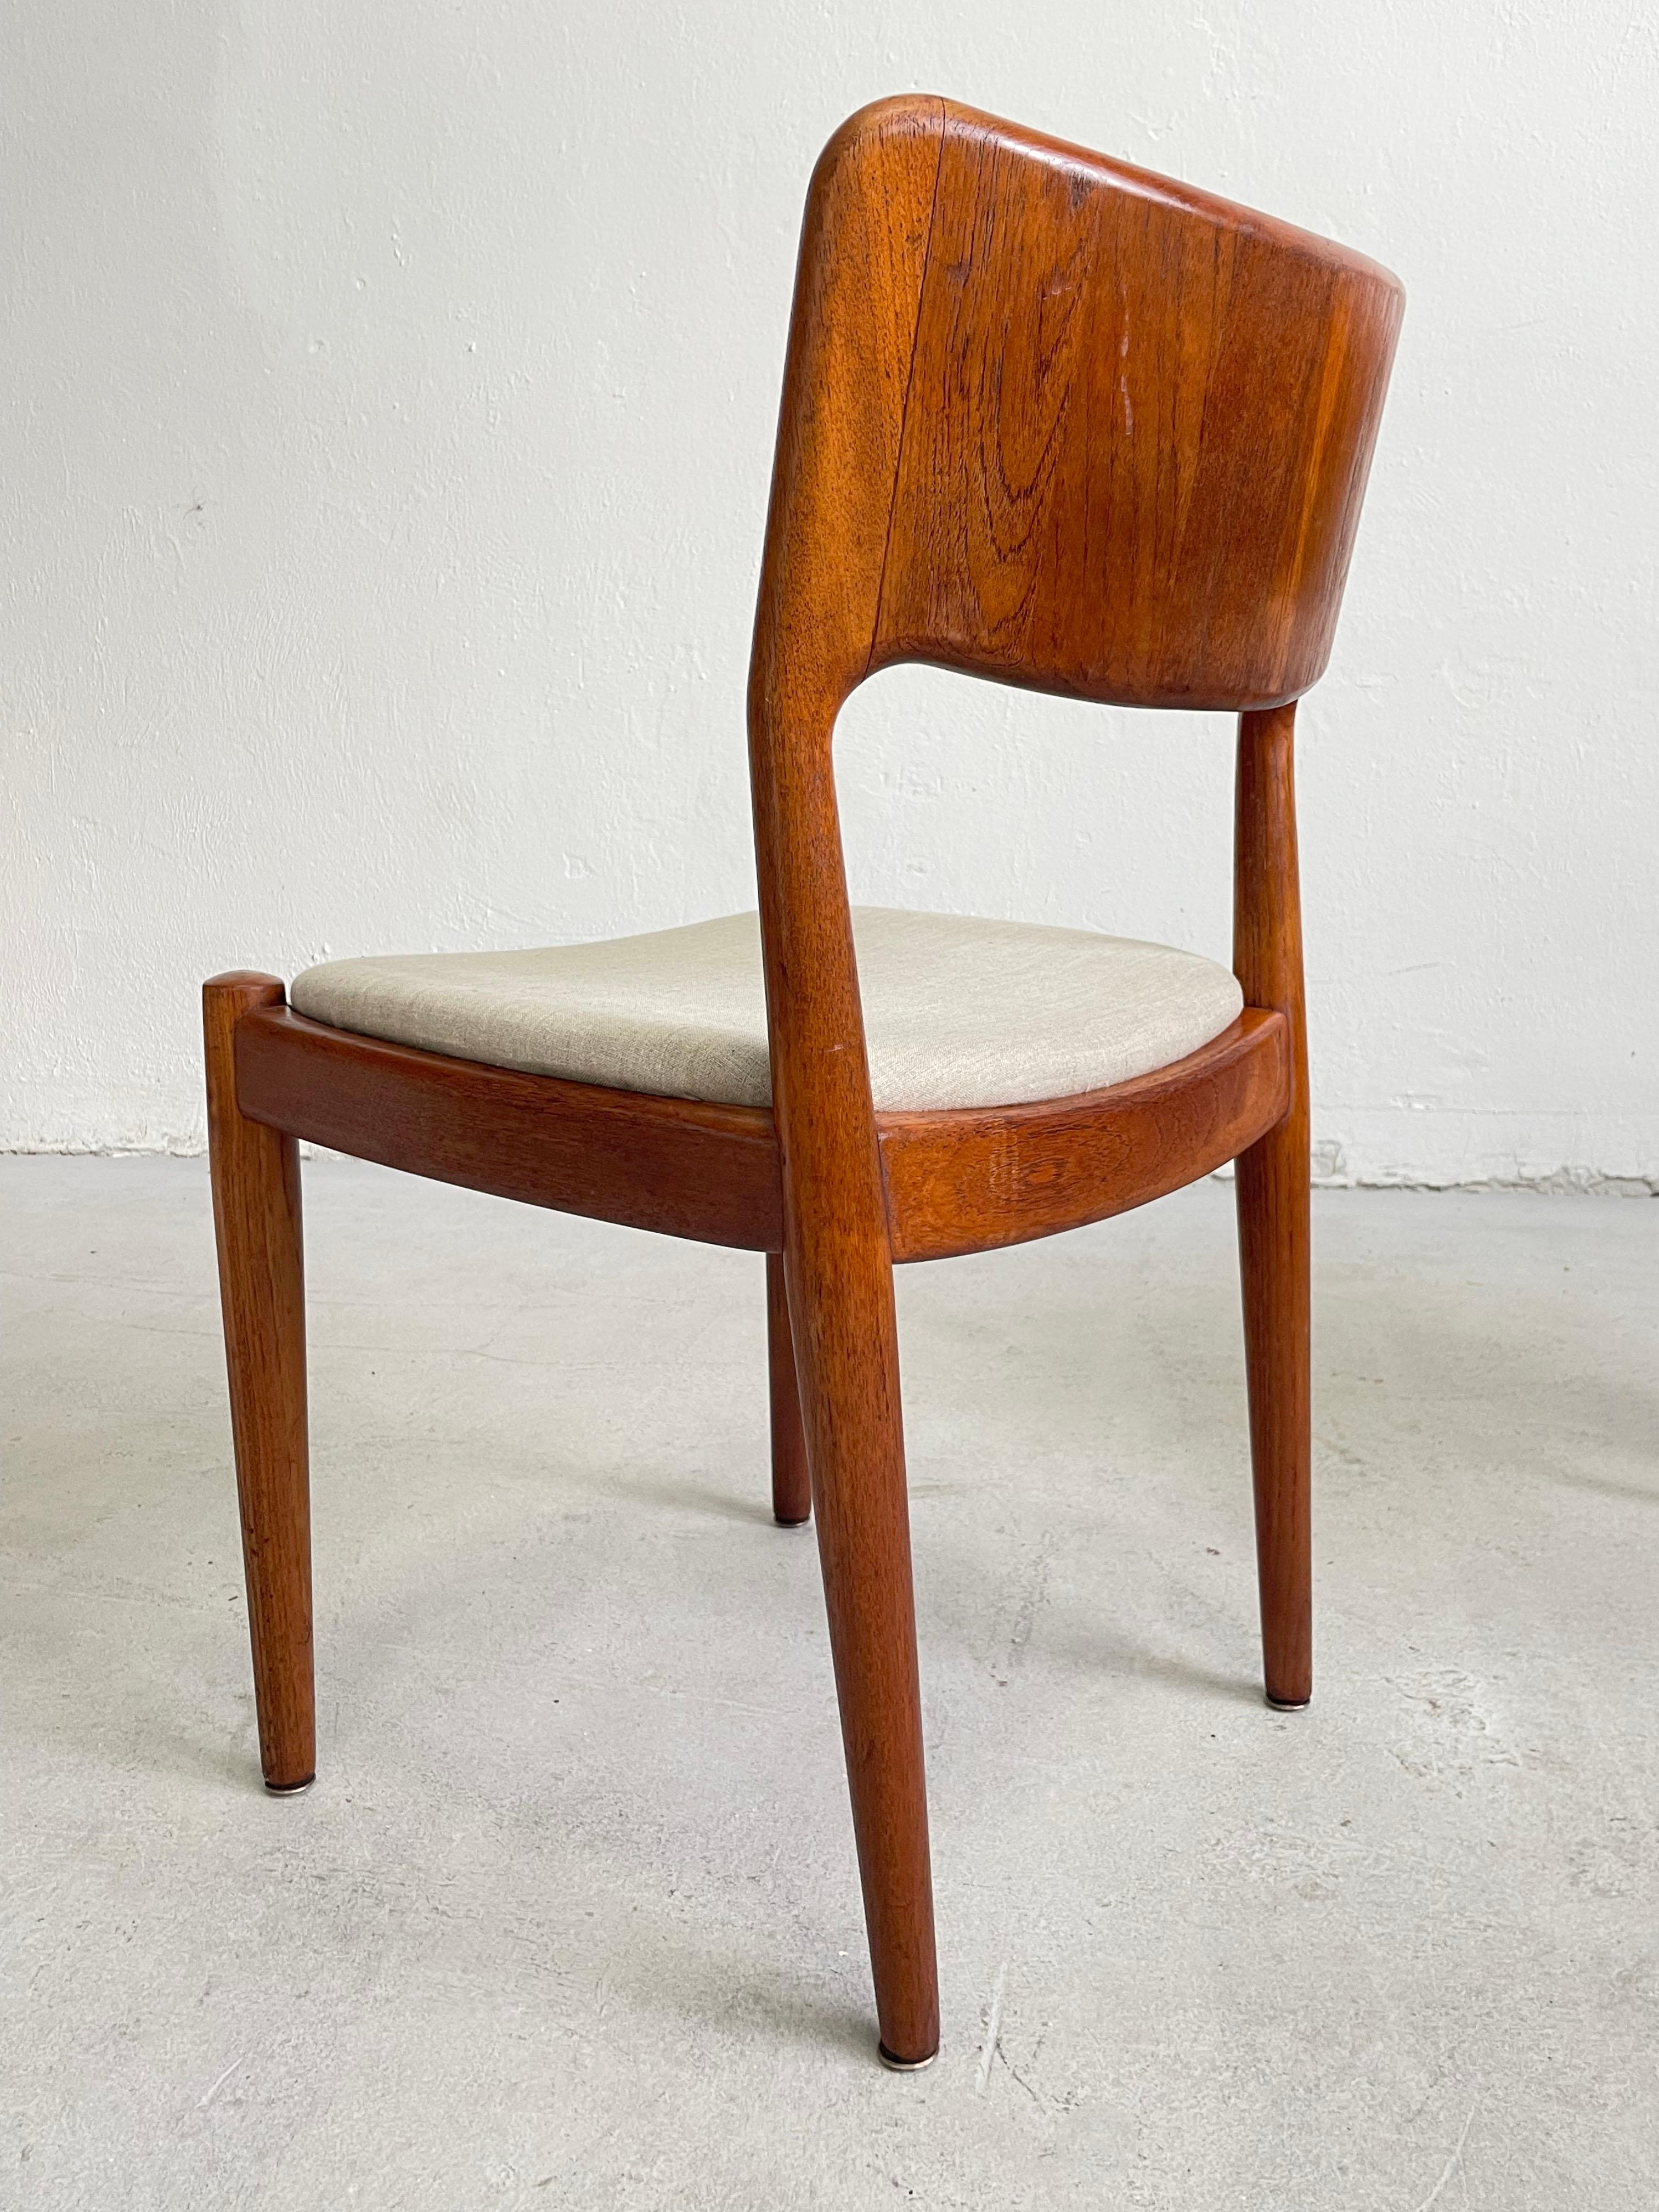 Hand-Crafted Set of 4 Vintage Scandinavian Mid-century Modern Teak Dining Chairs by Glostrup For Sale